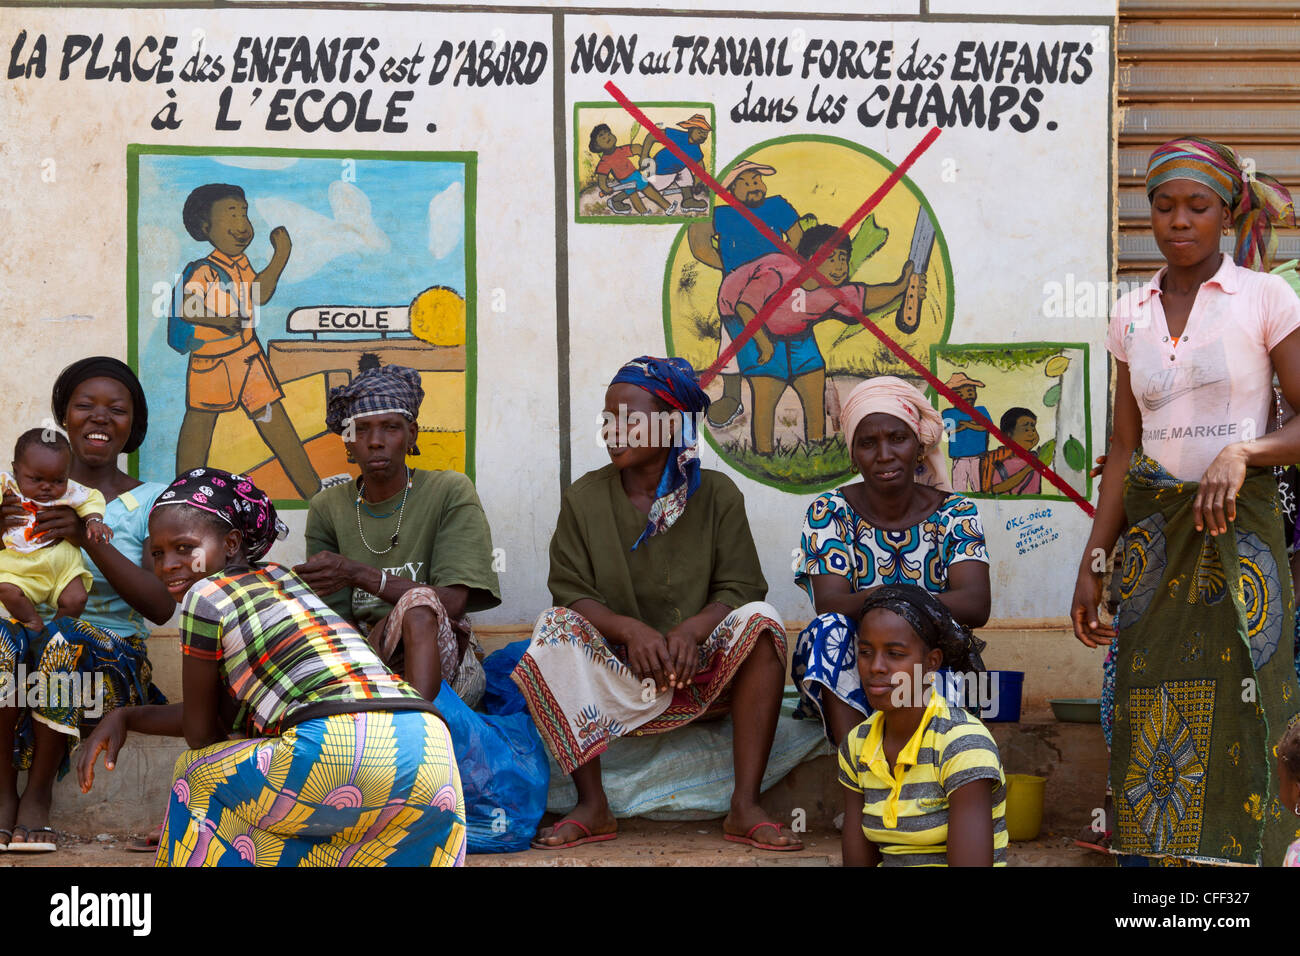 Women waiting to sort beans of cacao in front of a public notice again the child labor ,Duekoue, Ivory Coast ,West Africa Stock Photo